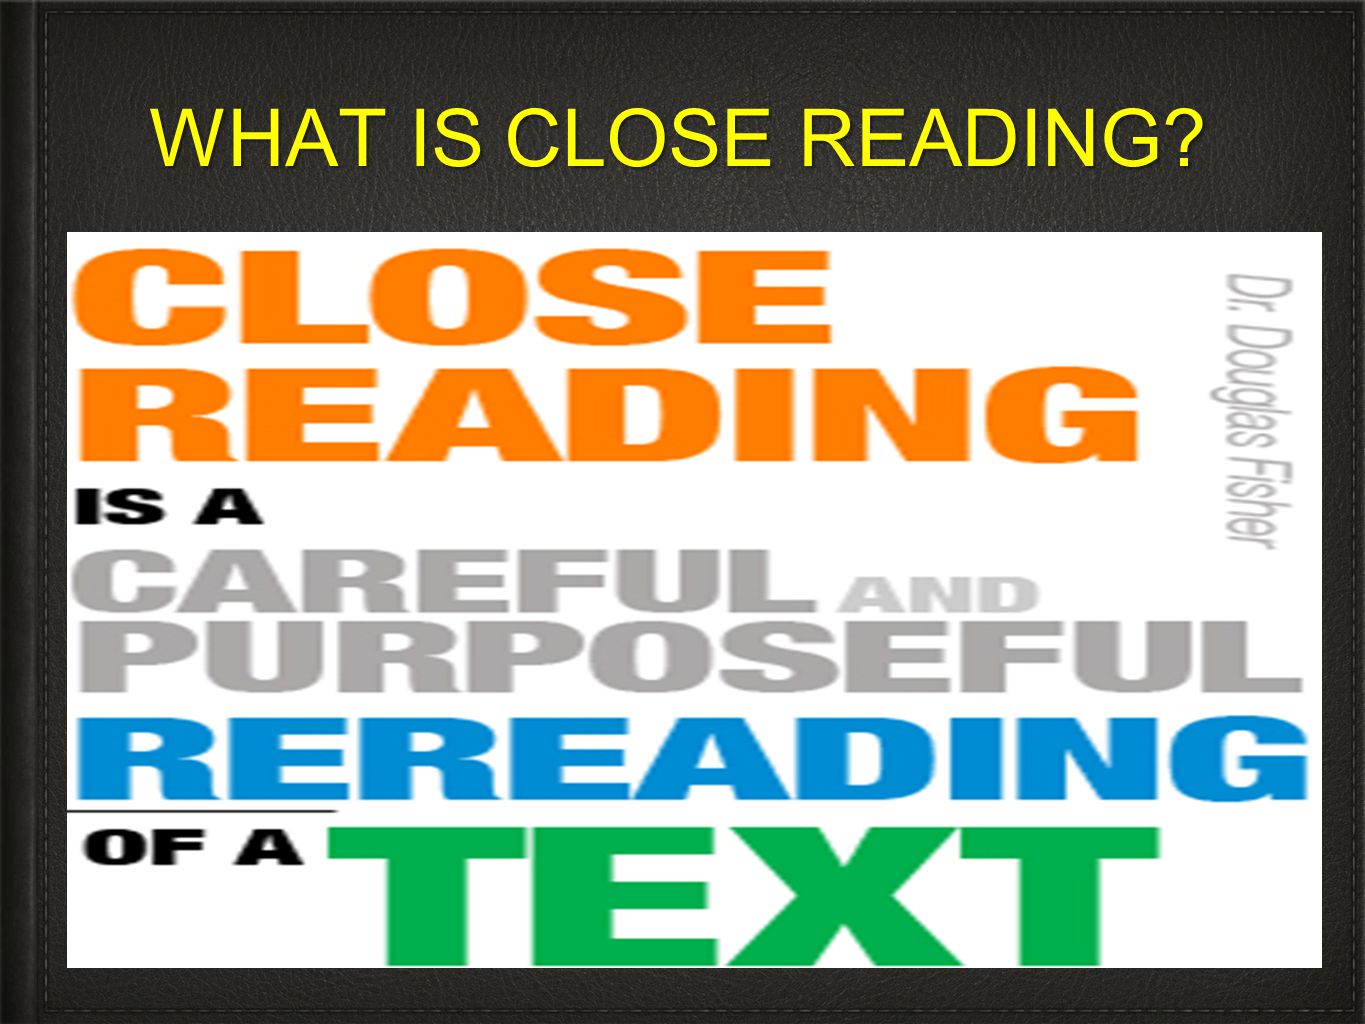 WHAT IS CLOSE READING